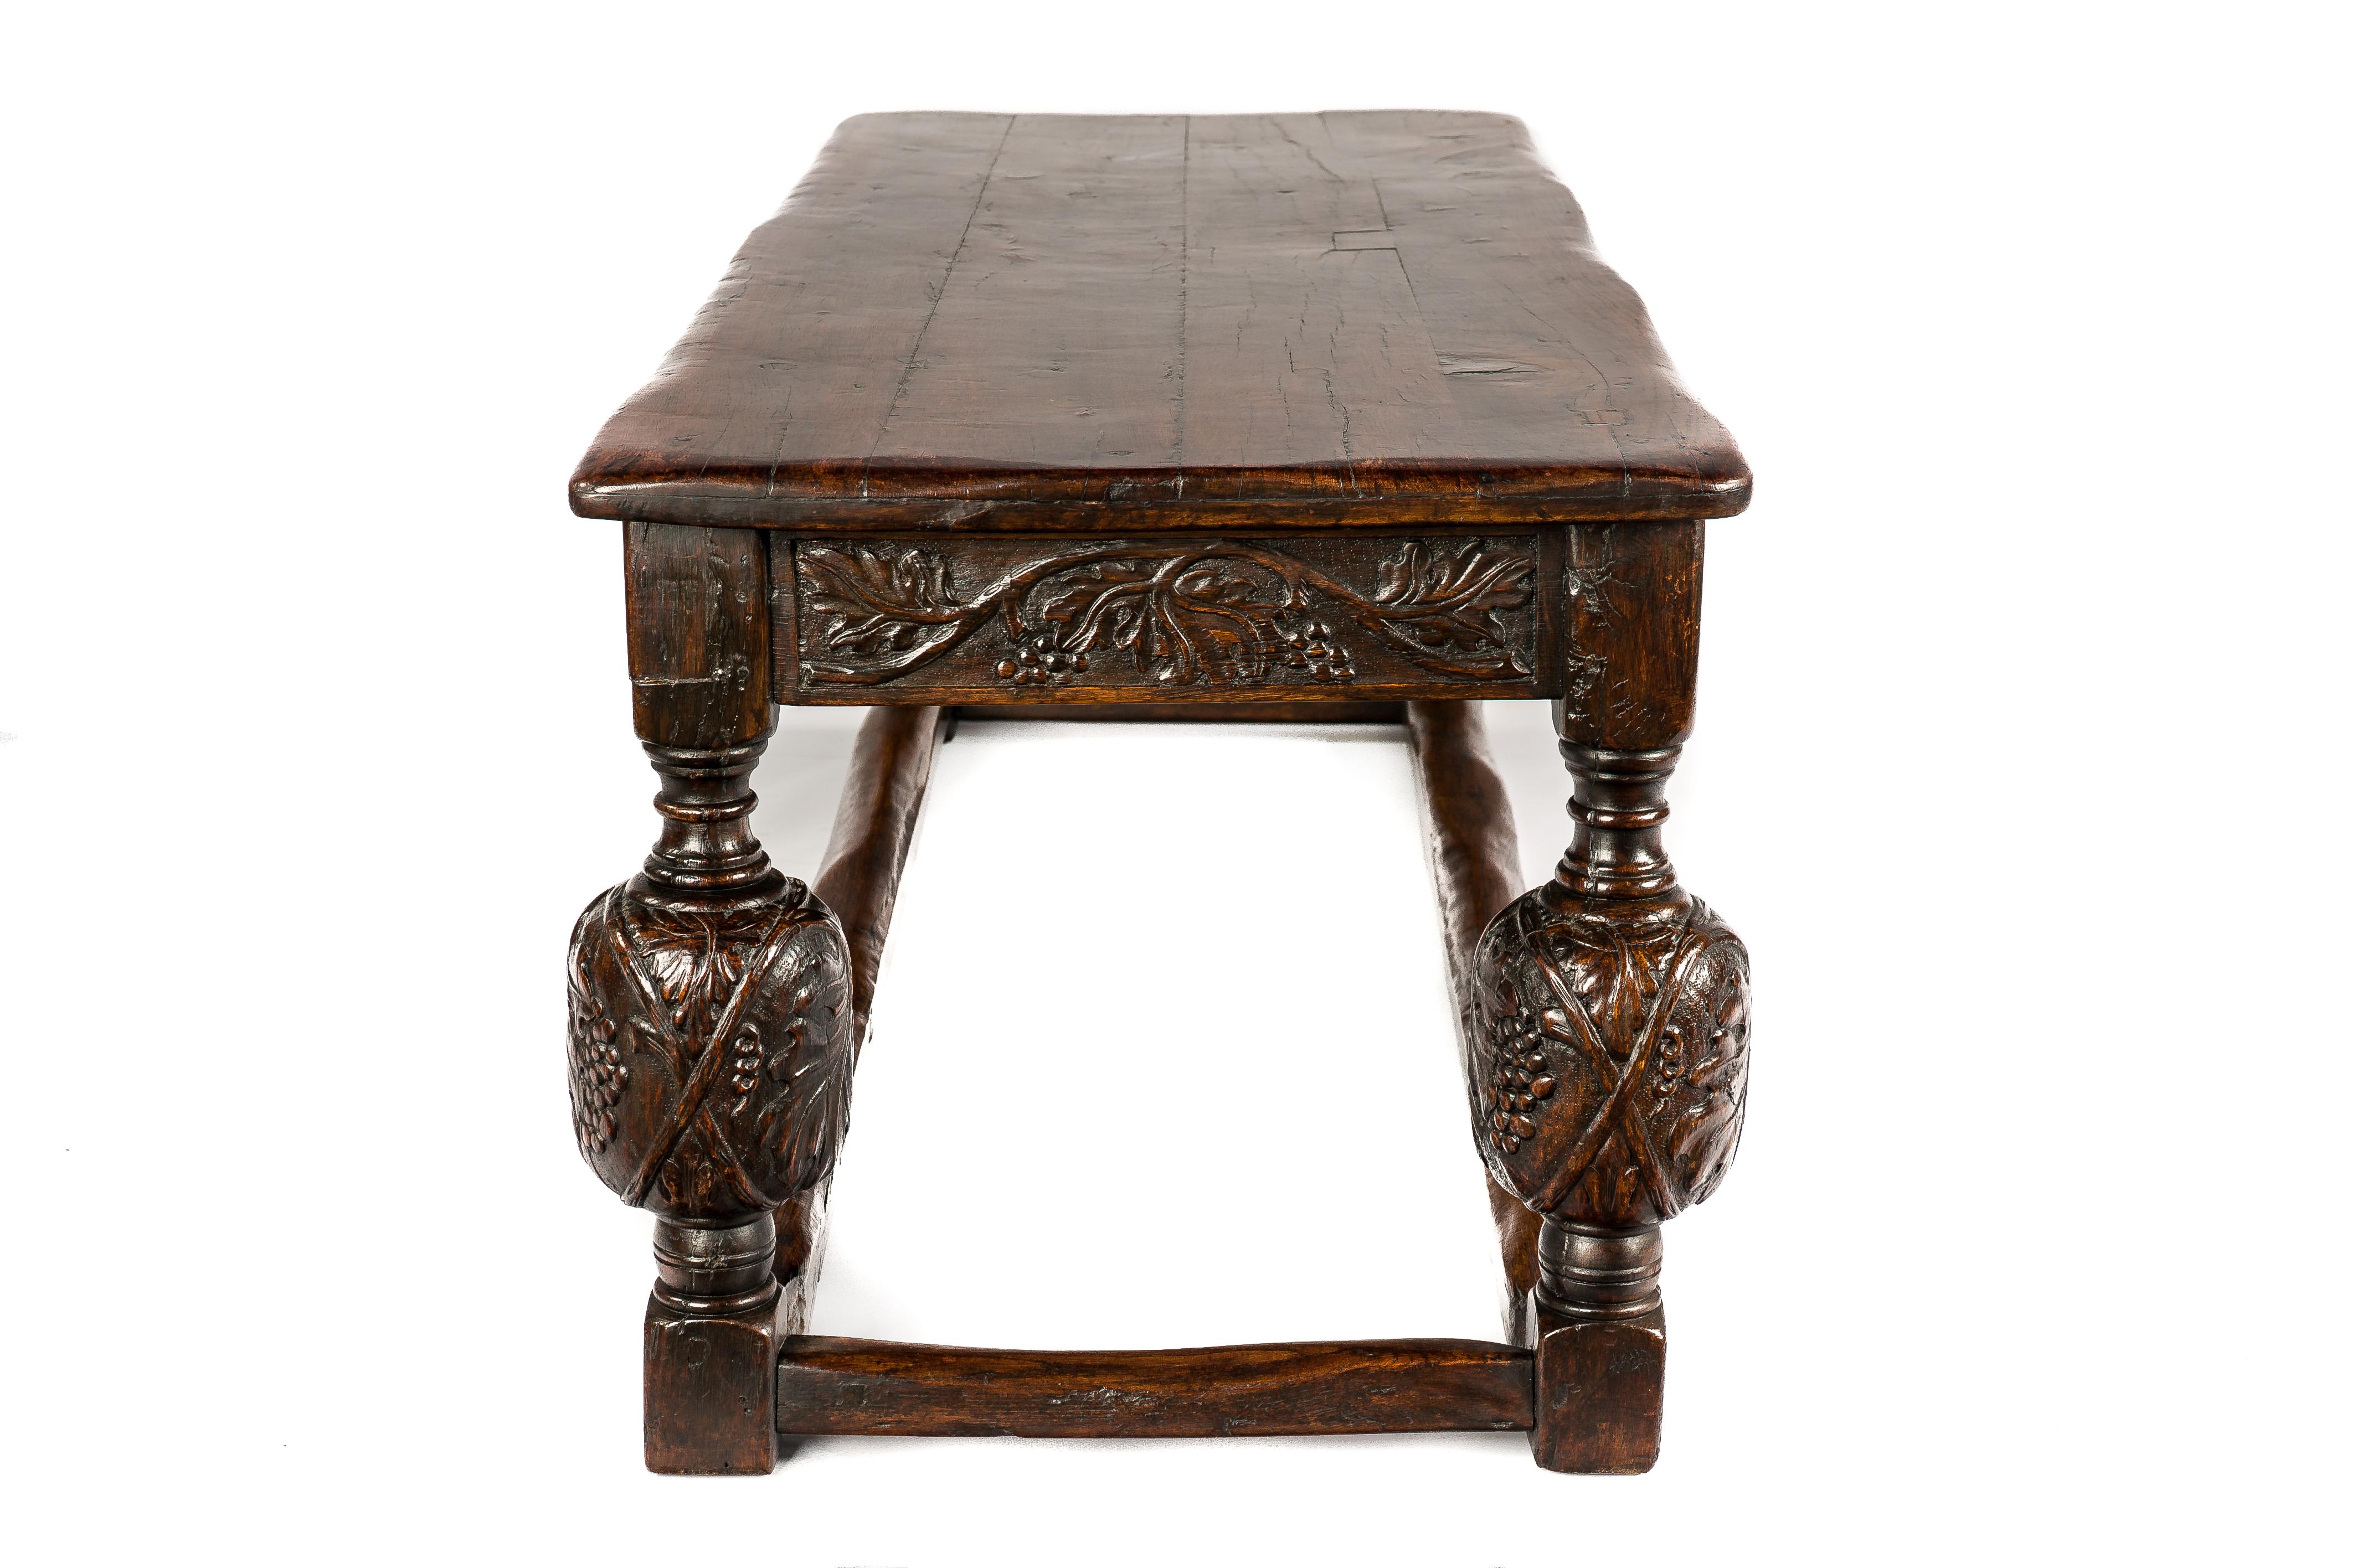 18th Century and Earlier antique early 18th century English Elizabethan Renaissance Long Carved Oak Table